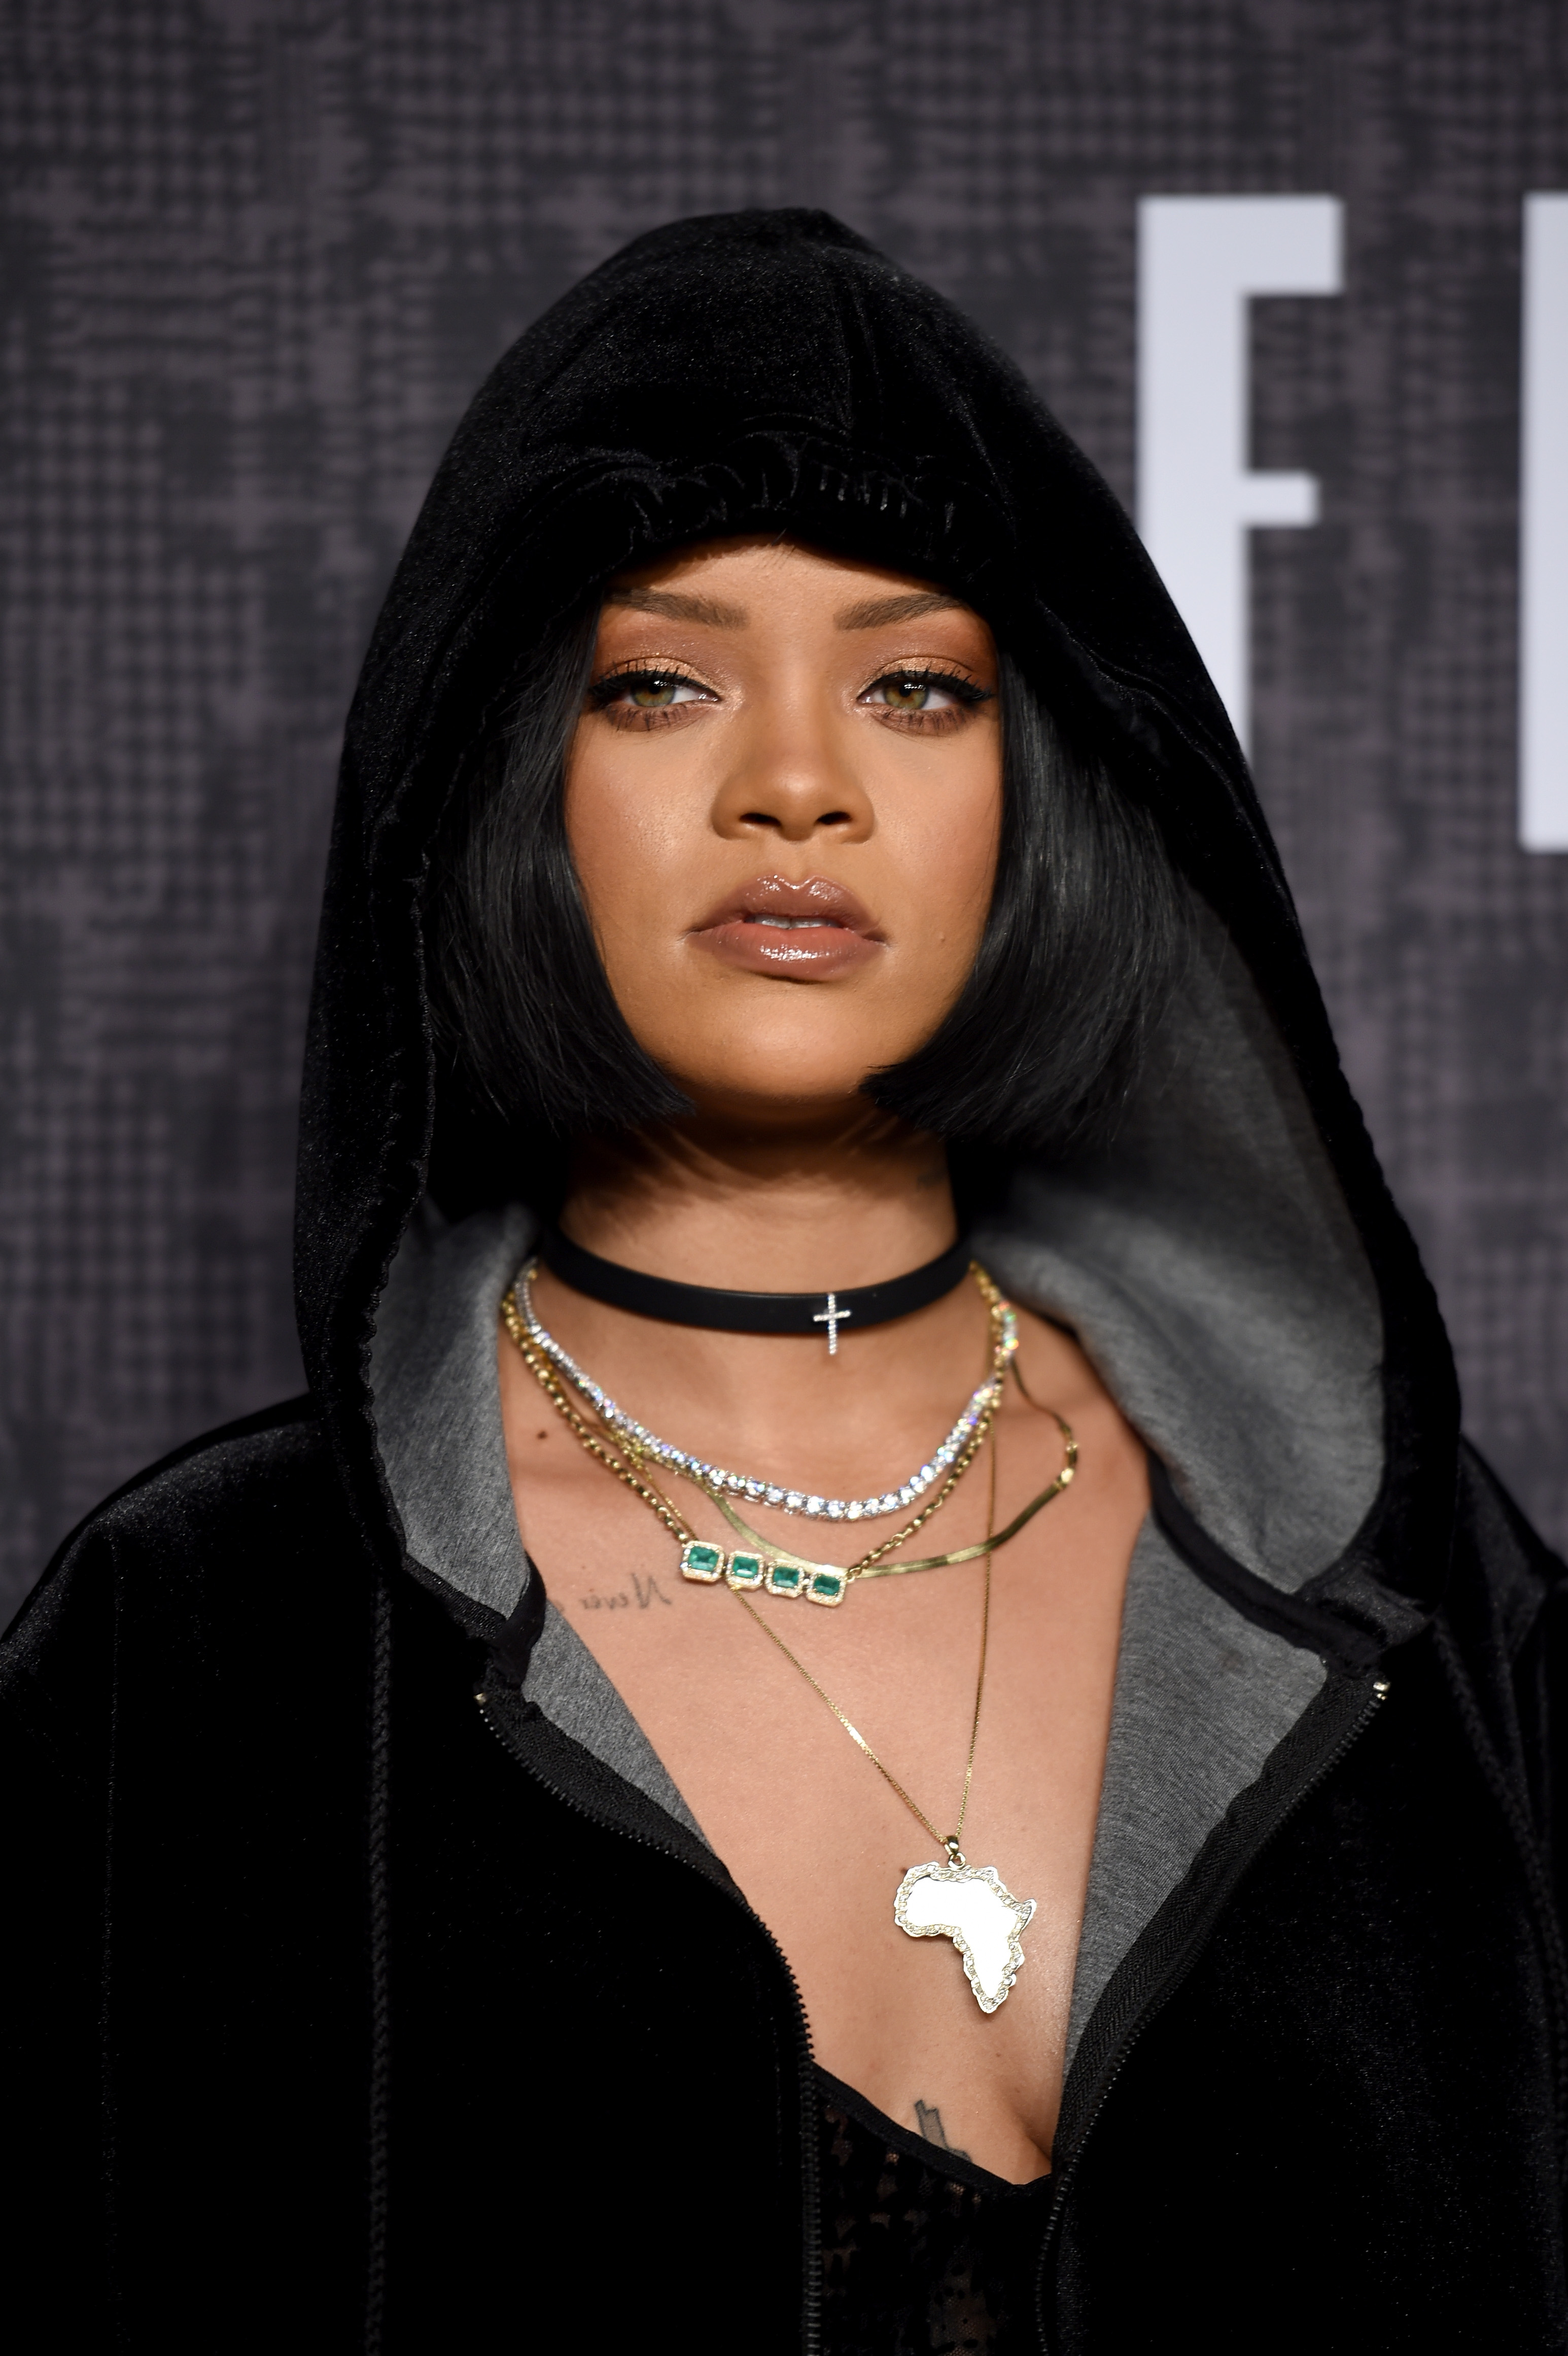 Rihanna impresses with the Fenty X Puma clothing and shoe collection